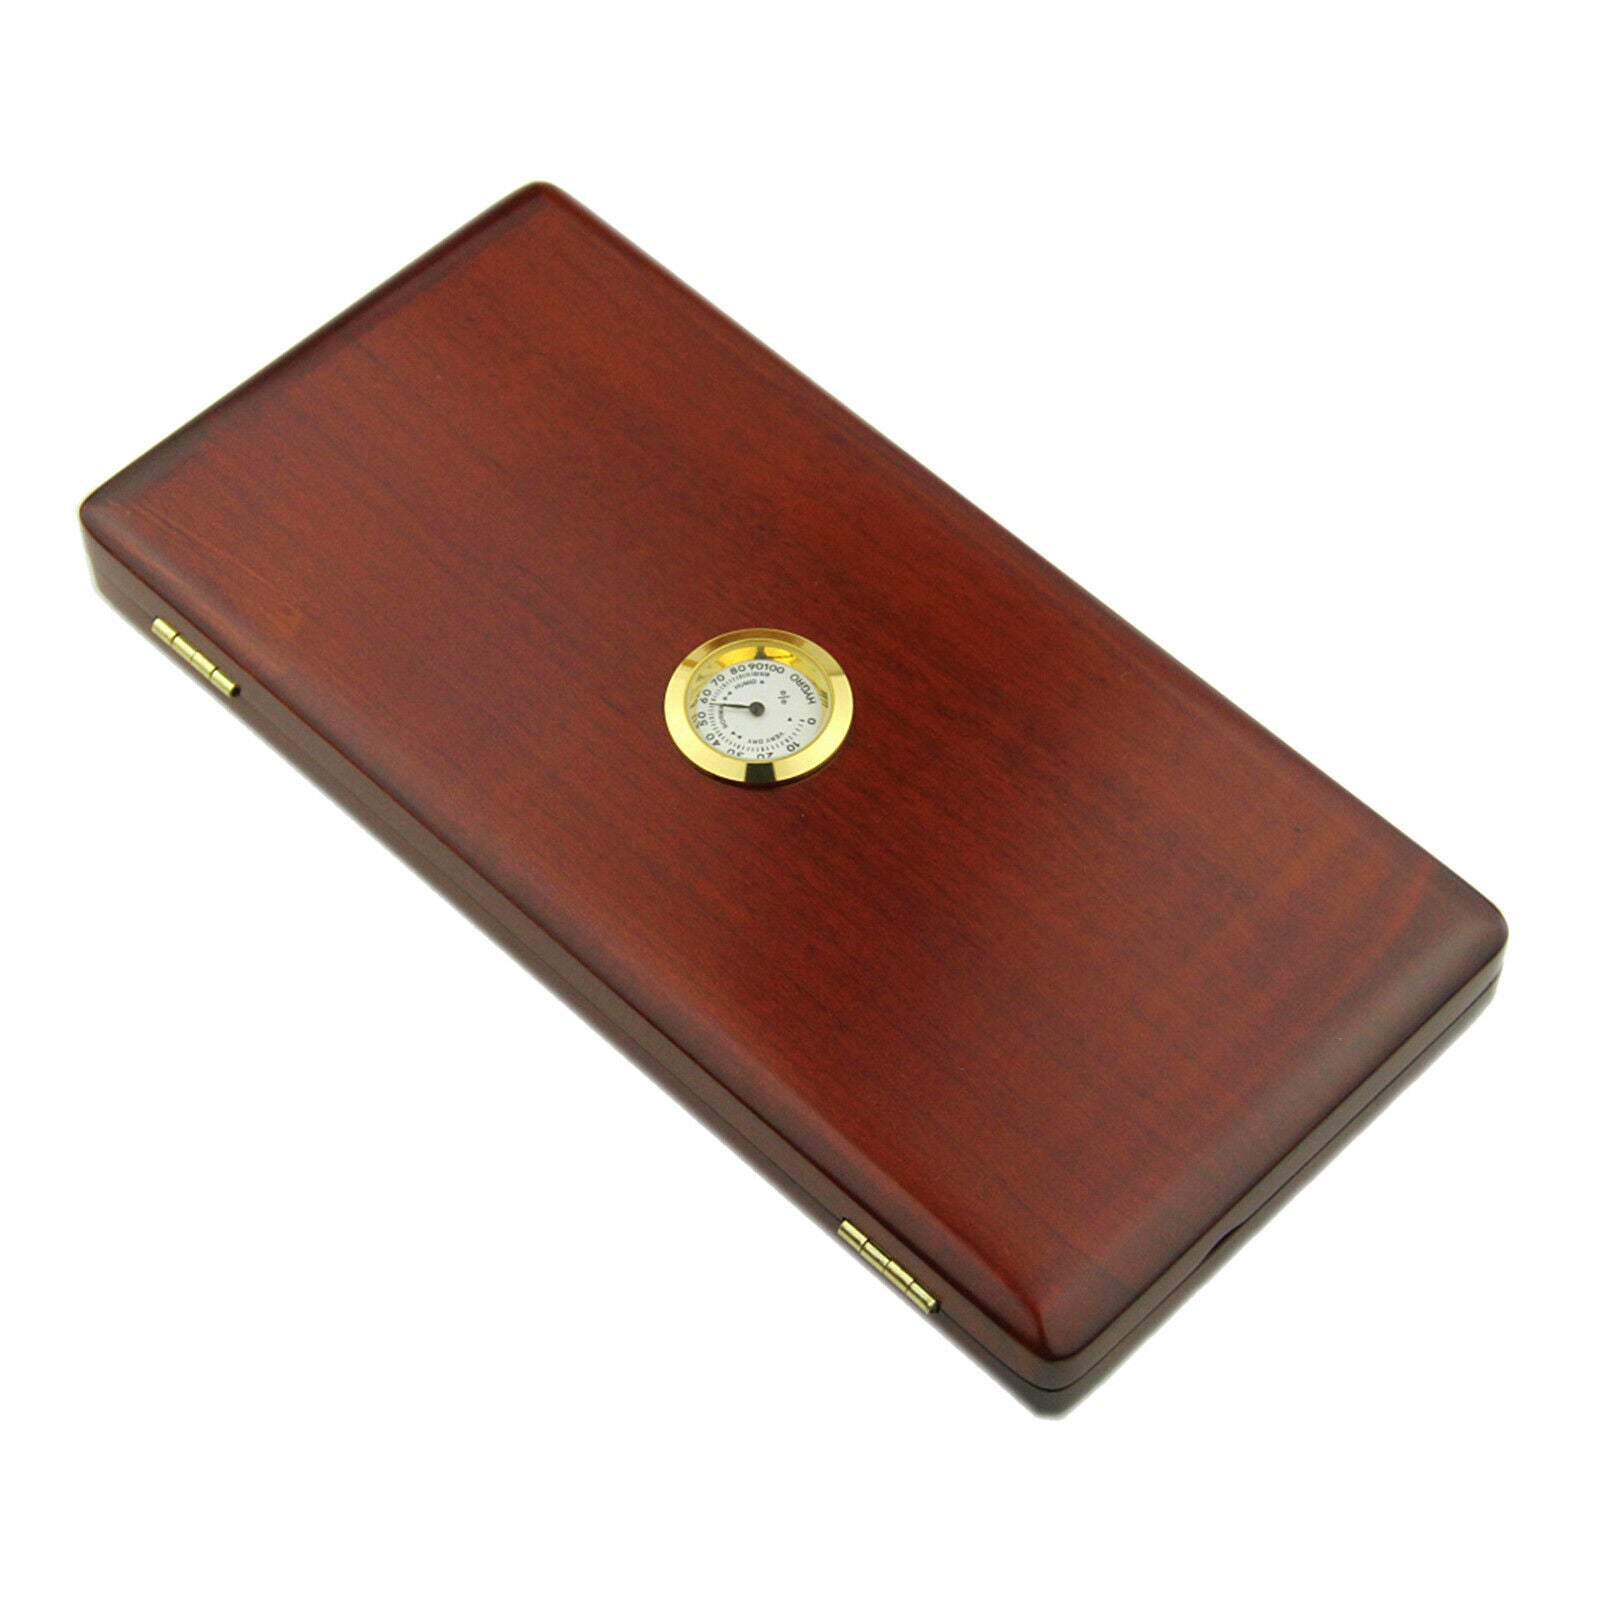 Solid Wood Oboe Reed Case Bulit-in Hygroneter Soft Slot Humidity Control